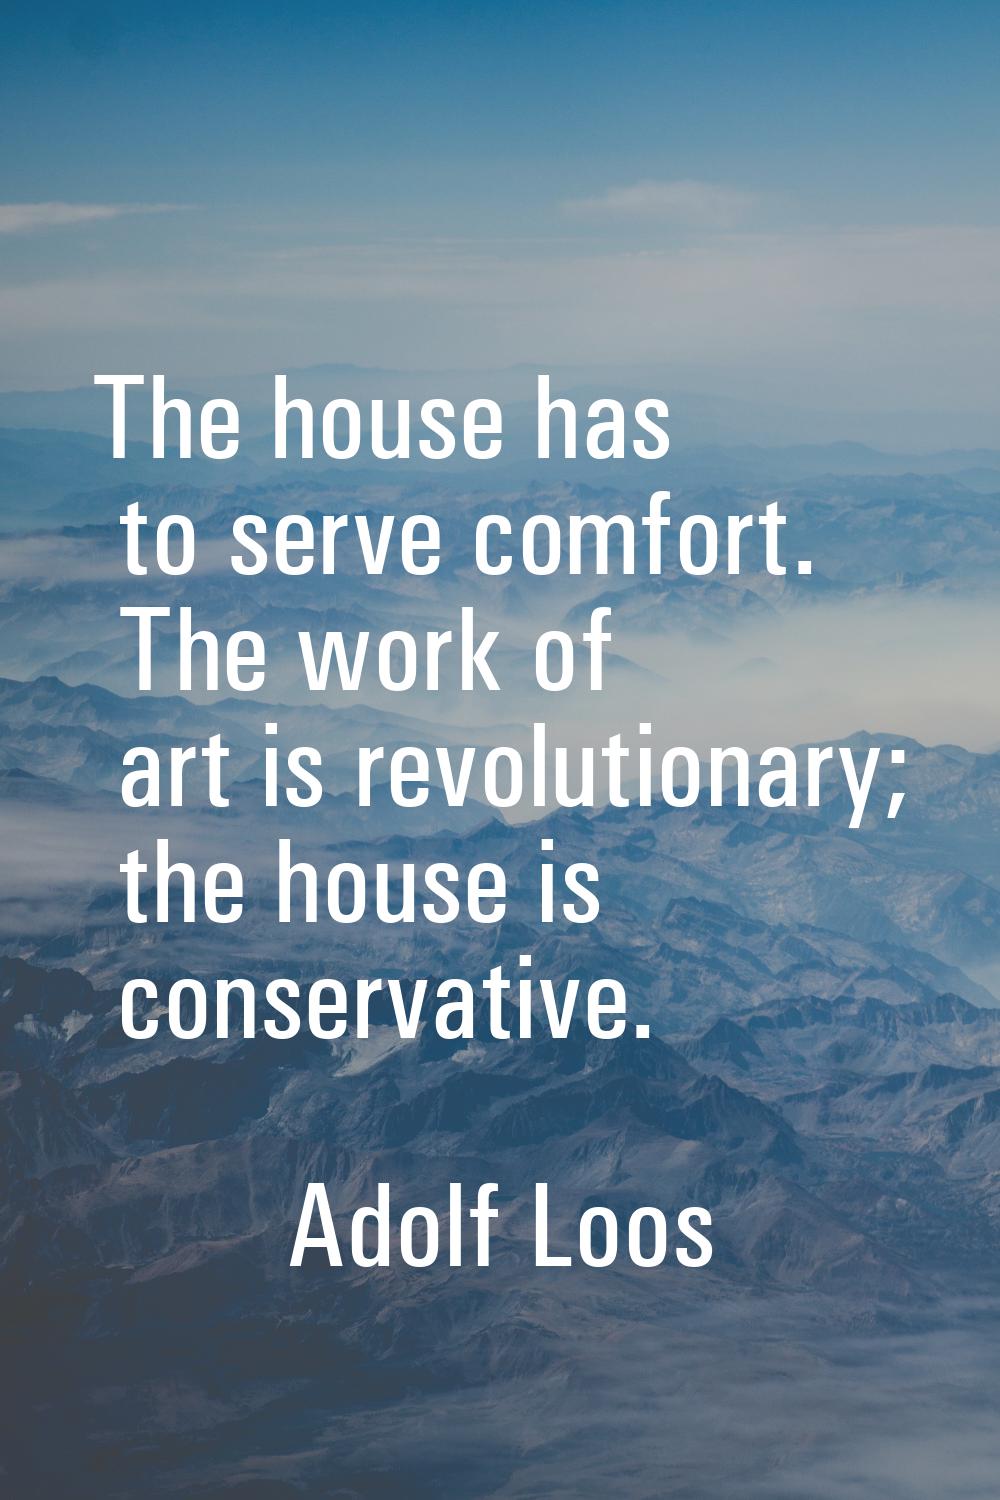 The house has to serve comfort. The work of art is revolutionary; the house is conservative.